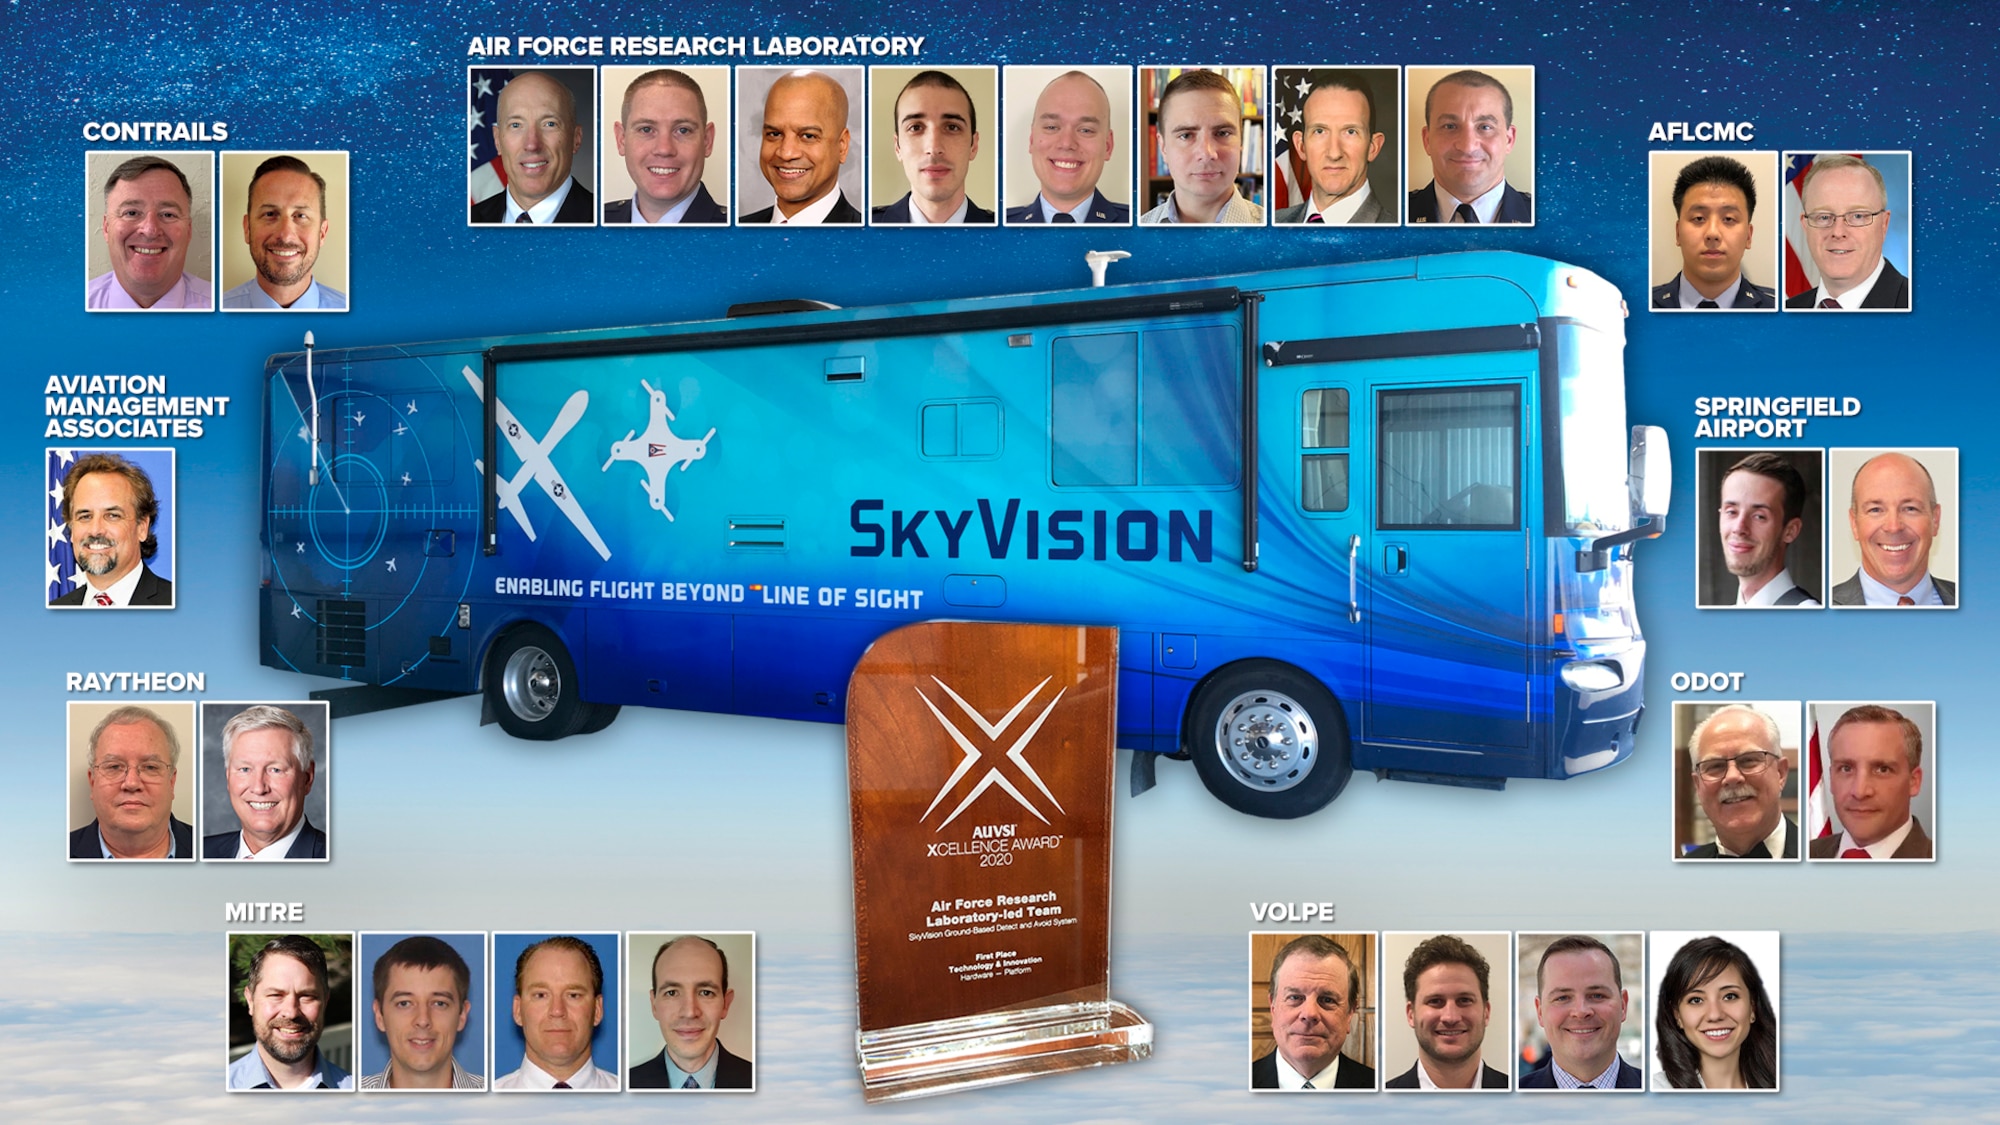 The SkyVision team, a joint effort between the Air Force Research Laboratory, Air Force Life Cycle Management Center, the state of Ohio, and industry partners, has been selected as the first-place winner in the Technology & Innovation (Hardware – Platform) category of this year’s Association for Unmanned Vehicles Systems International (AUVSI) Awards. The award will be presented during the AUVSI XPONENTIAL event, being held virtually this year on Oct. 6. (U.S. Air Force Photo Illustration/Patrick Londergan)